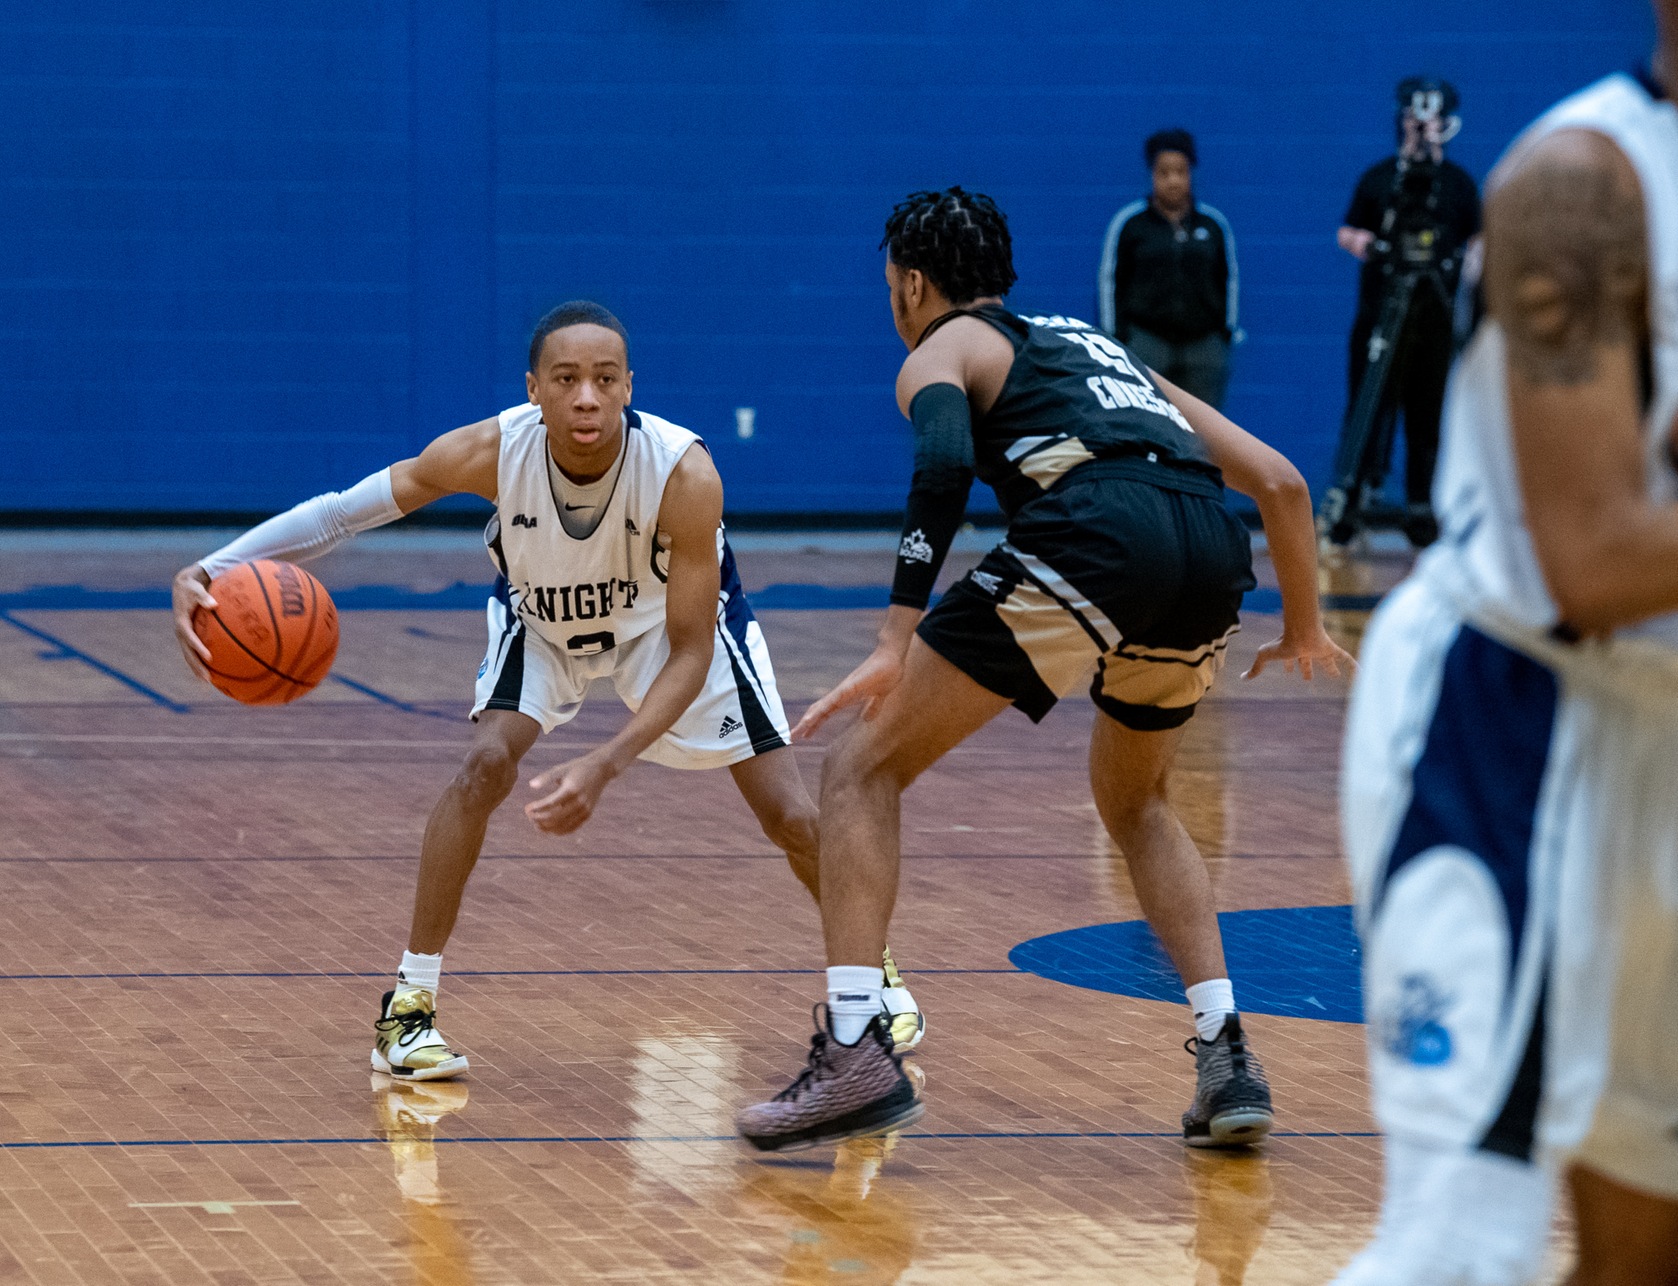 Men’s Basketball Starts 2020 off with Win over Conestoga